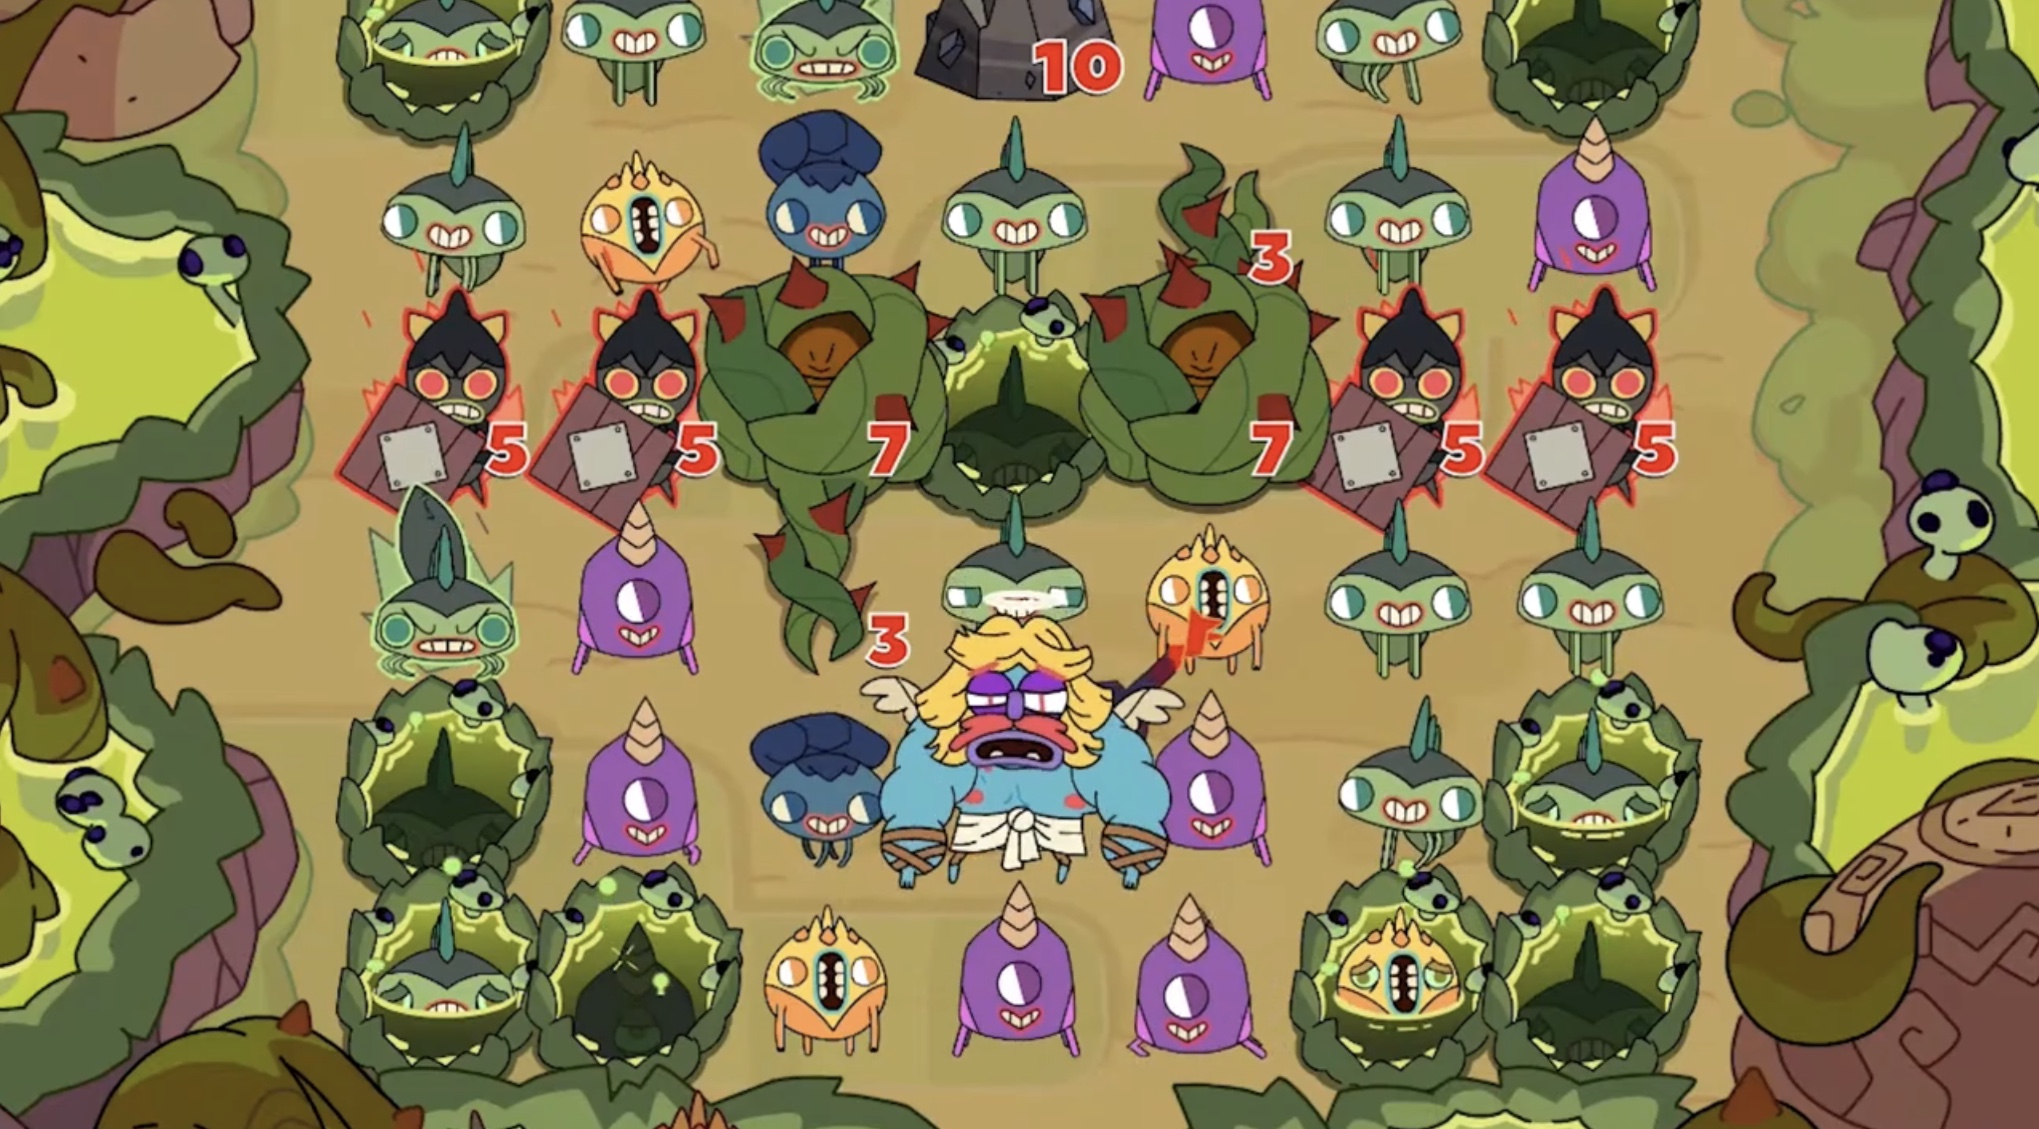 ‘Grindstone’ from Capybara Games on Apple Arcade Just Got a Huge Update Bringing In 50 New Levels, a Daily Grind Mode, and More